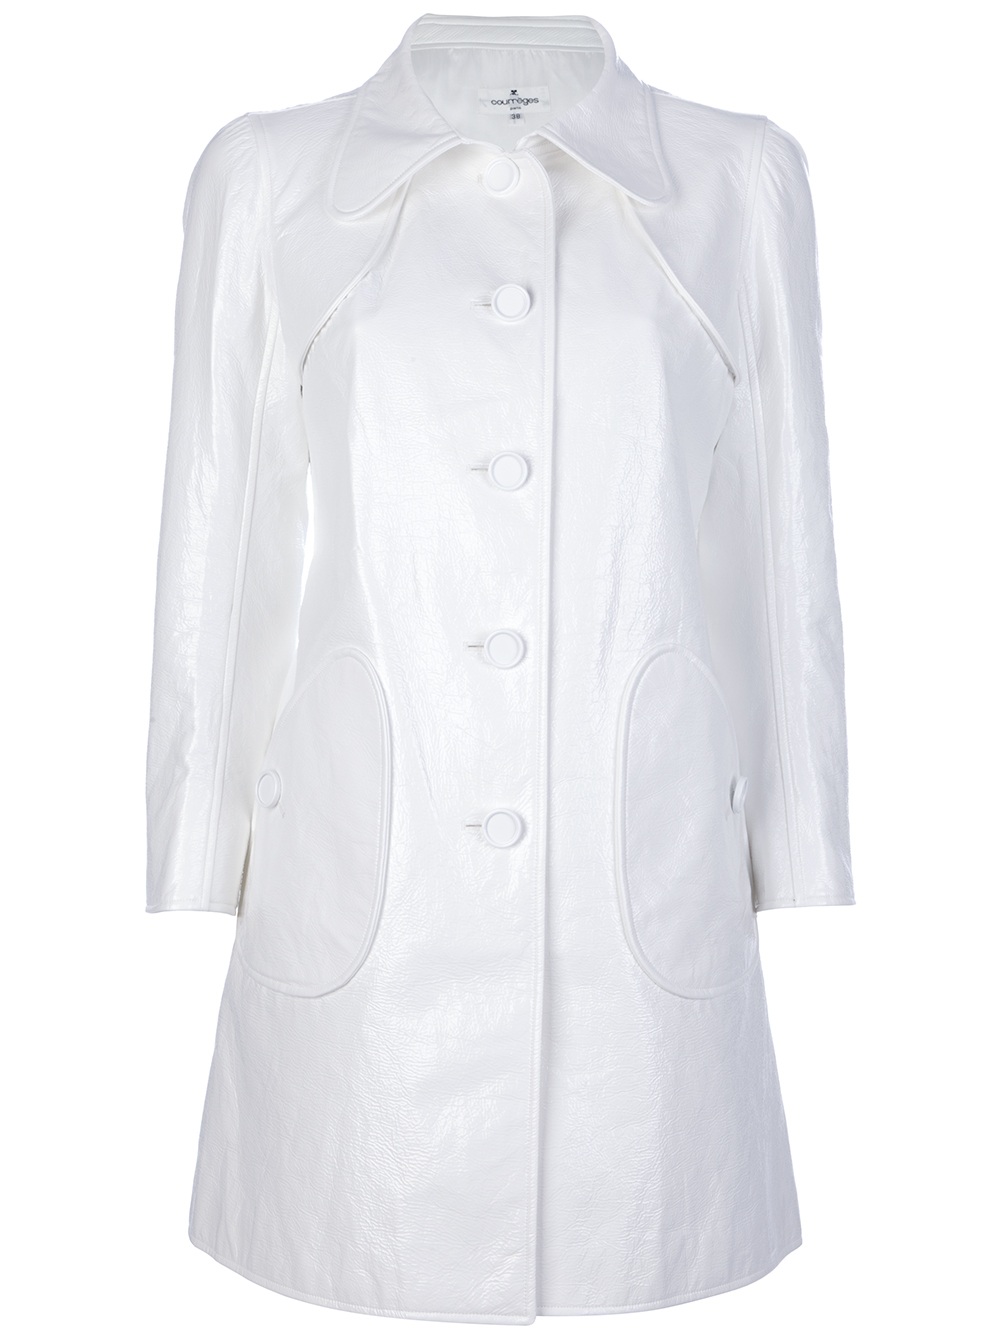 Lyst Courreges Vinyl Trench Coat in White